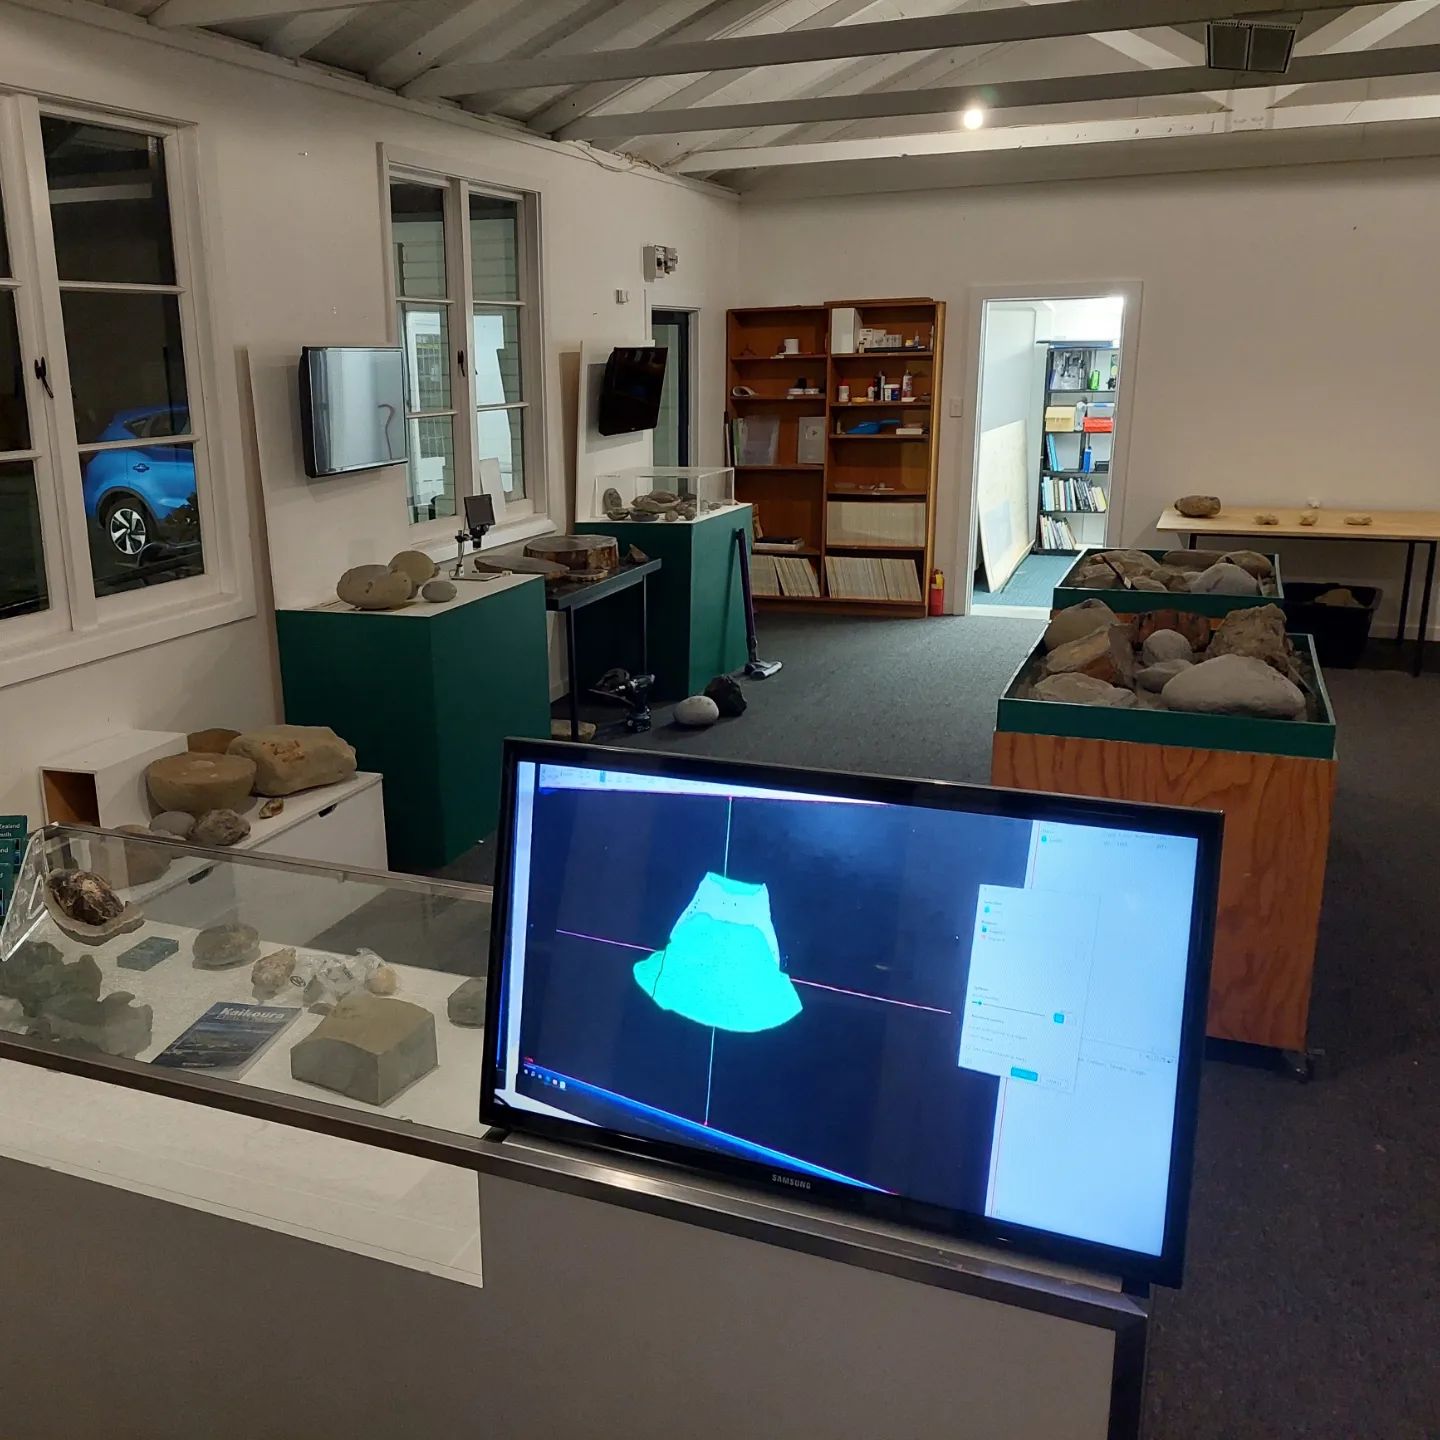 This Sat 25 May and Sun 26 May. Come and check out some of my fossil collection, there's a kids area for digging as well. I will have the turtle skull, massive crab, penguin, plesiosaur bones and many other fossils on display.
It's in Waikuku, about 30 min north of Christchurch at the Old School Collective. There's a great cafe as well if you fancy a coffee.

    